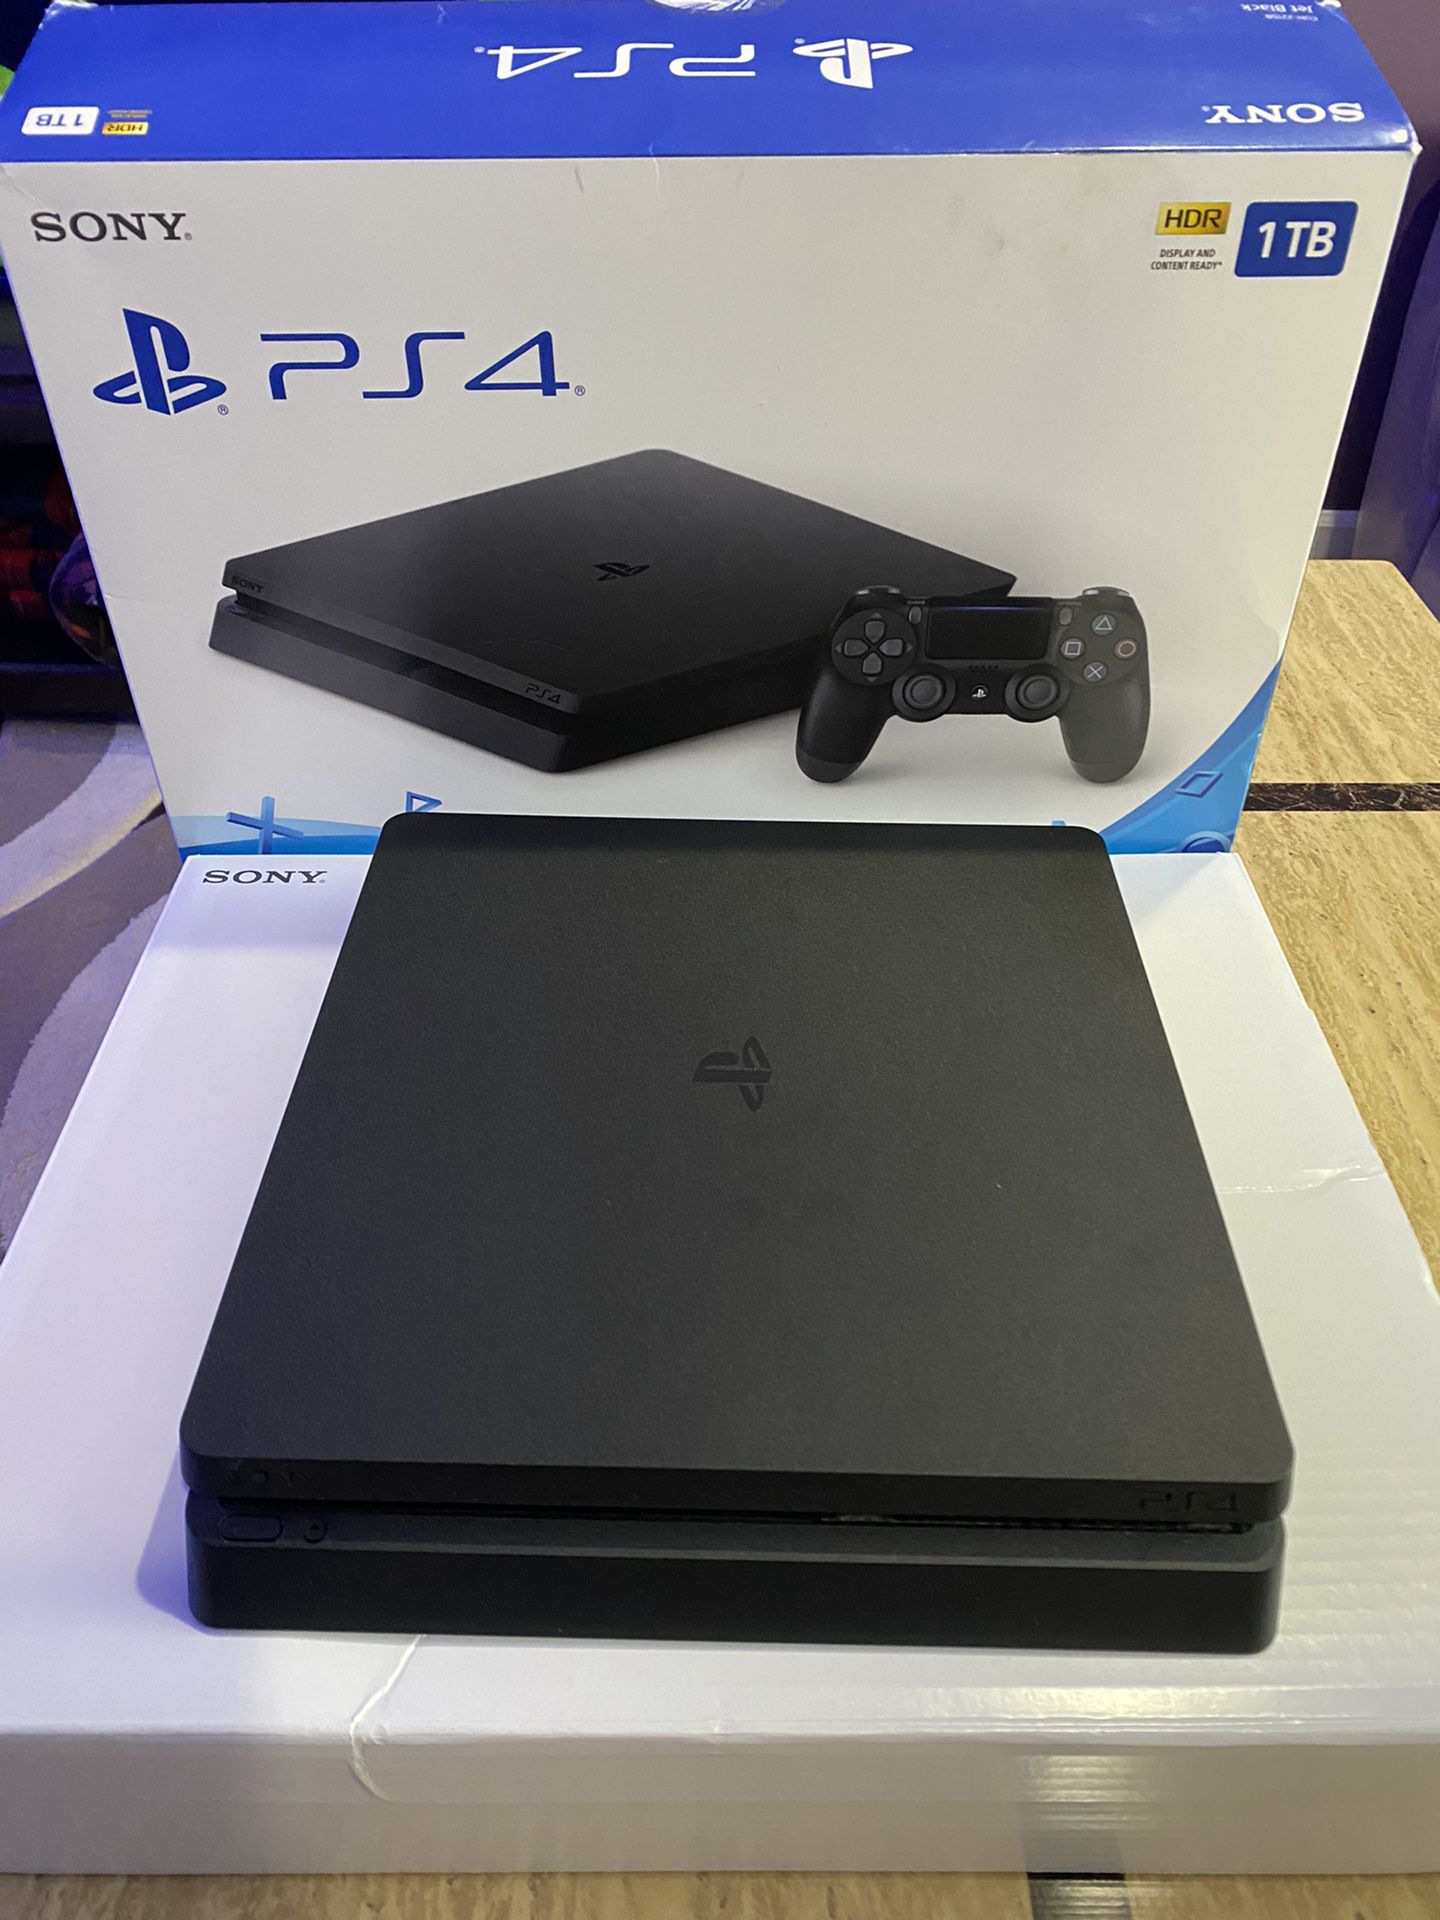 Sony PS4 with Extras